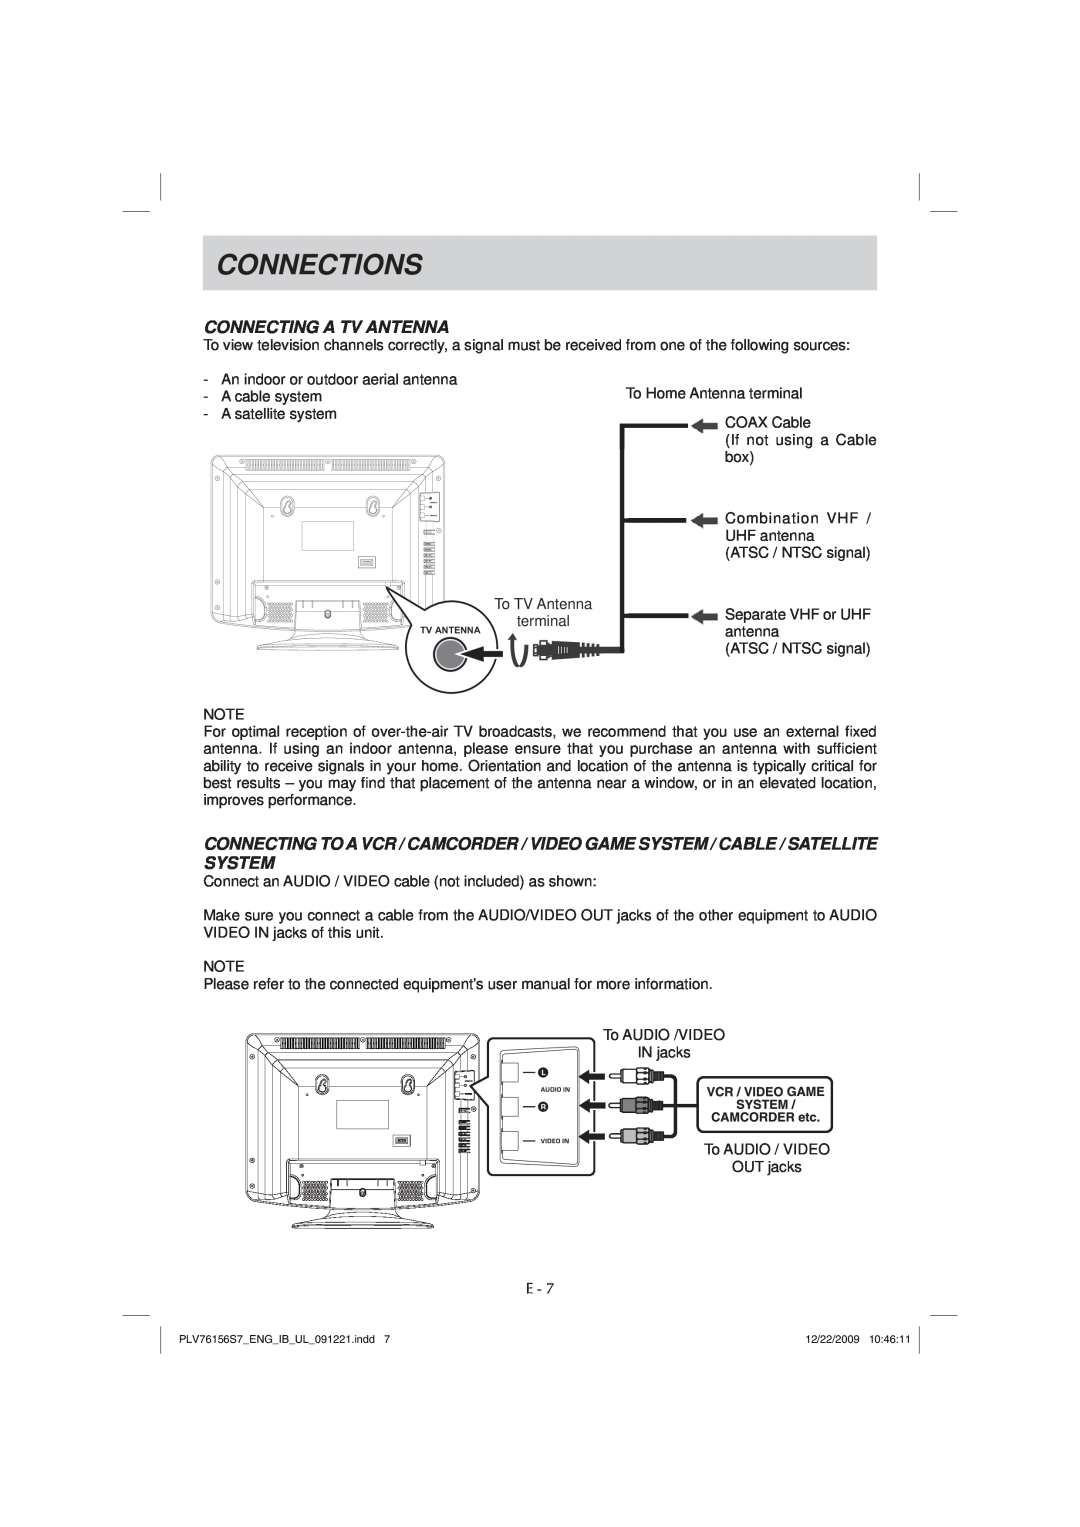 Venturer PLV7615H instruction manual Connections, Connecting A Tv Antenna 